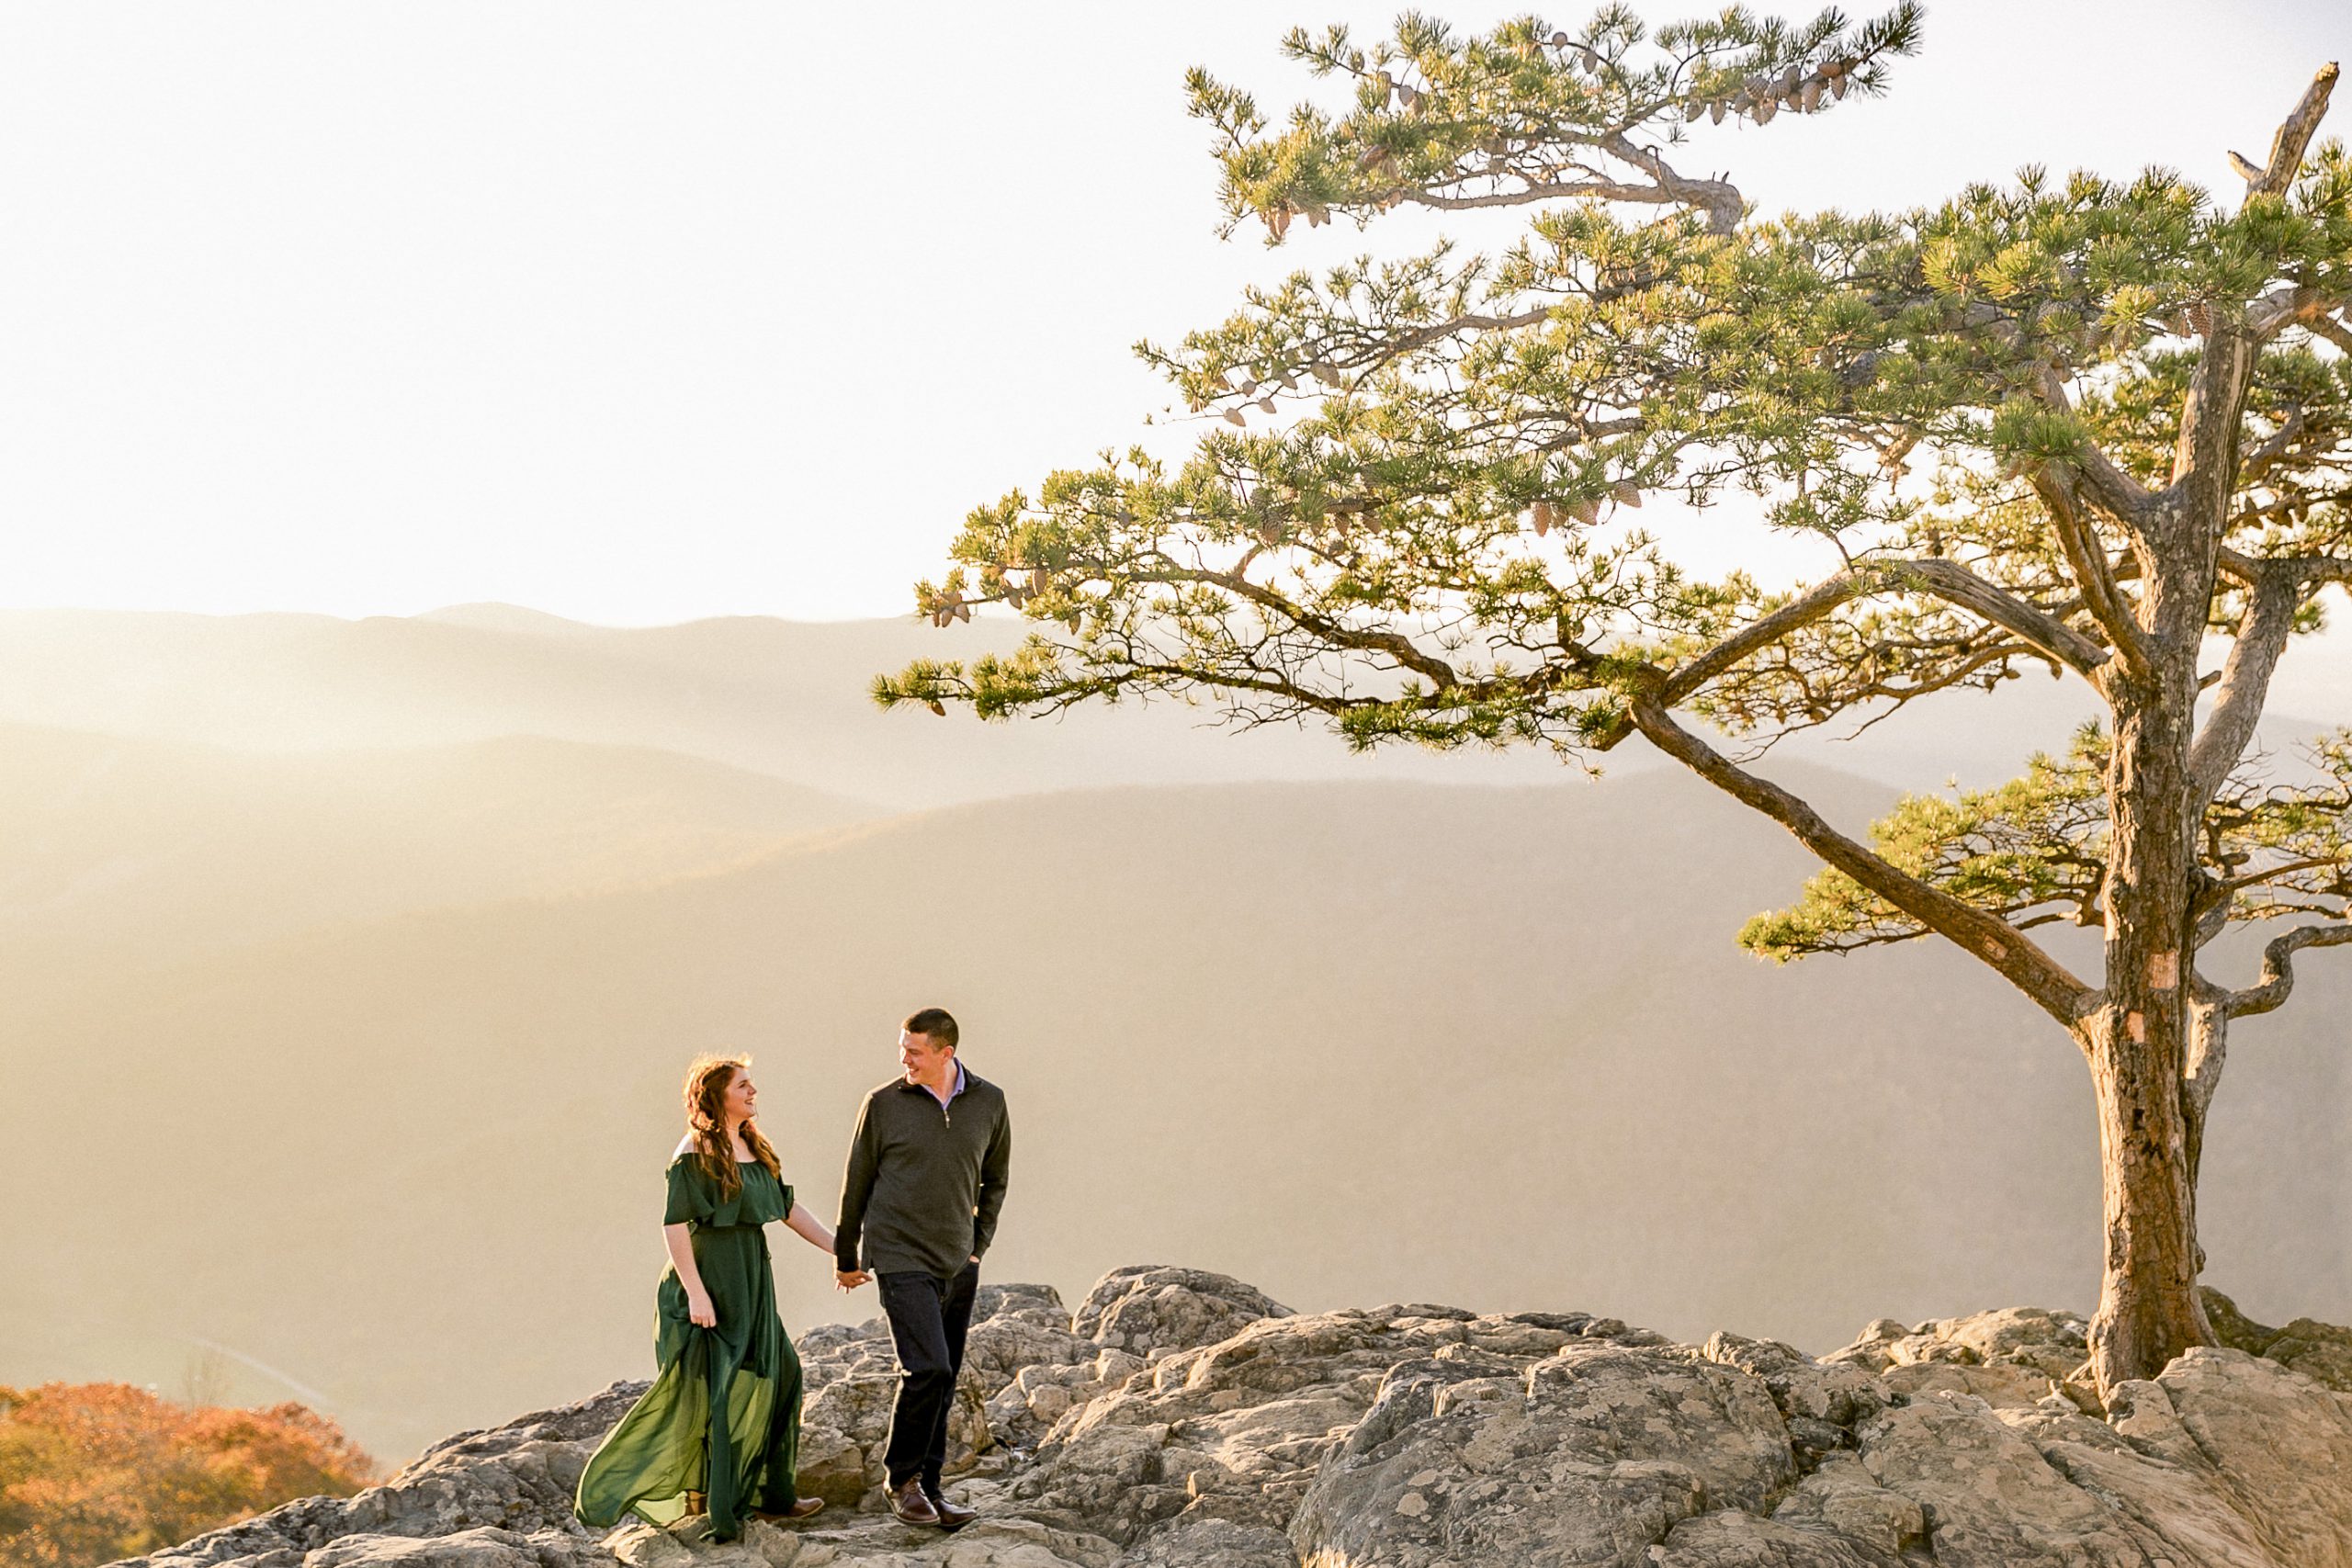 Autumn & Justin - Engagment Session - Raven's Roost - Amative Creative